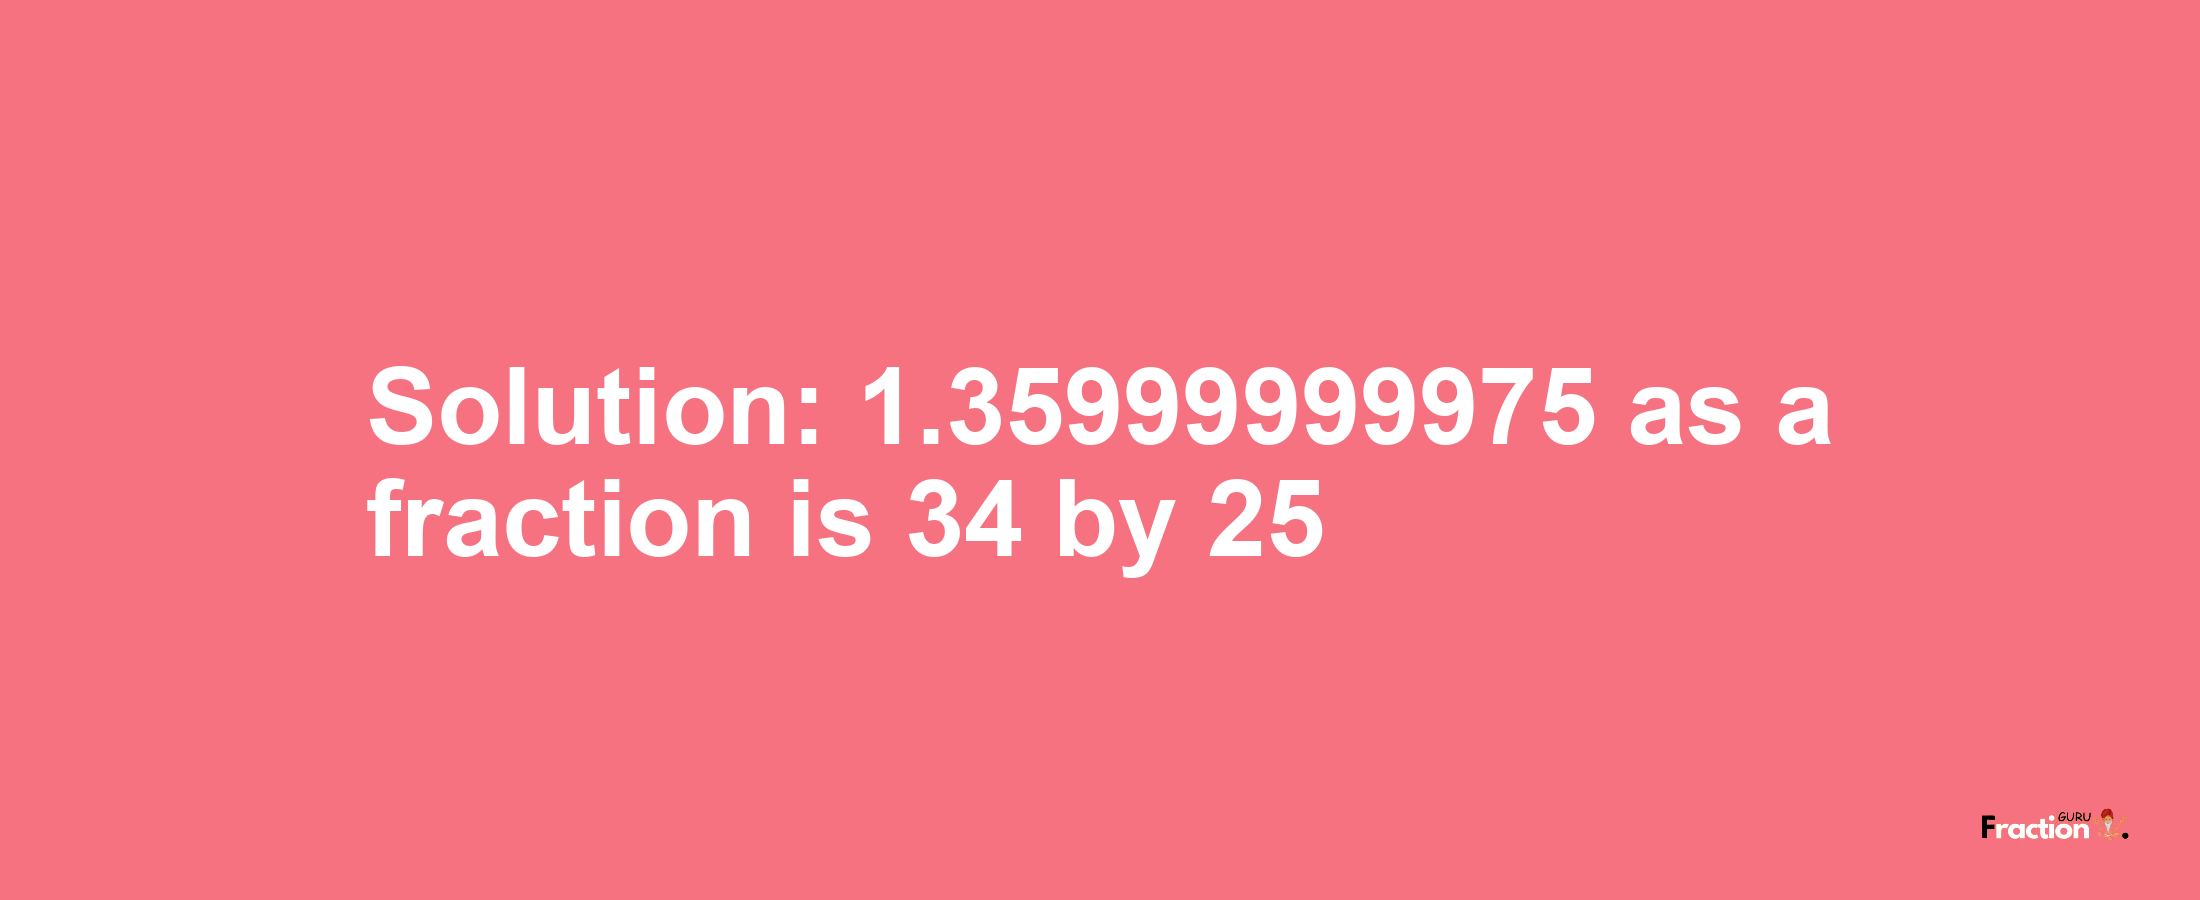 Solution:1.35999999975 as a fraction is 34/25